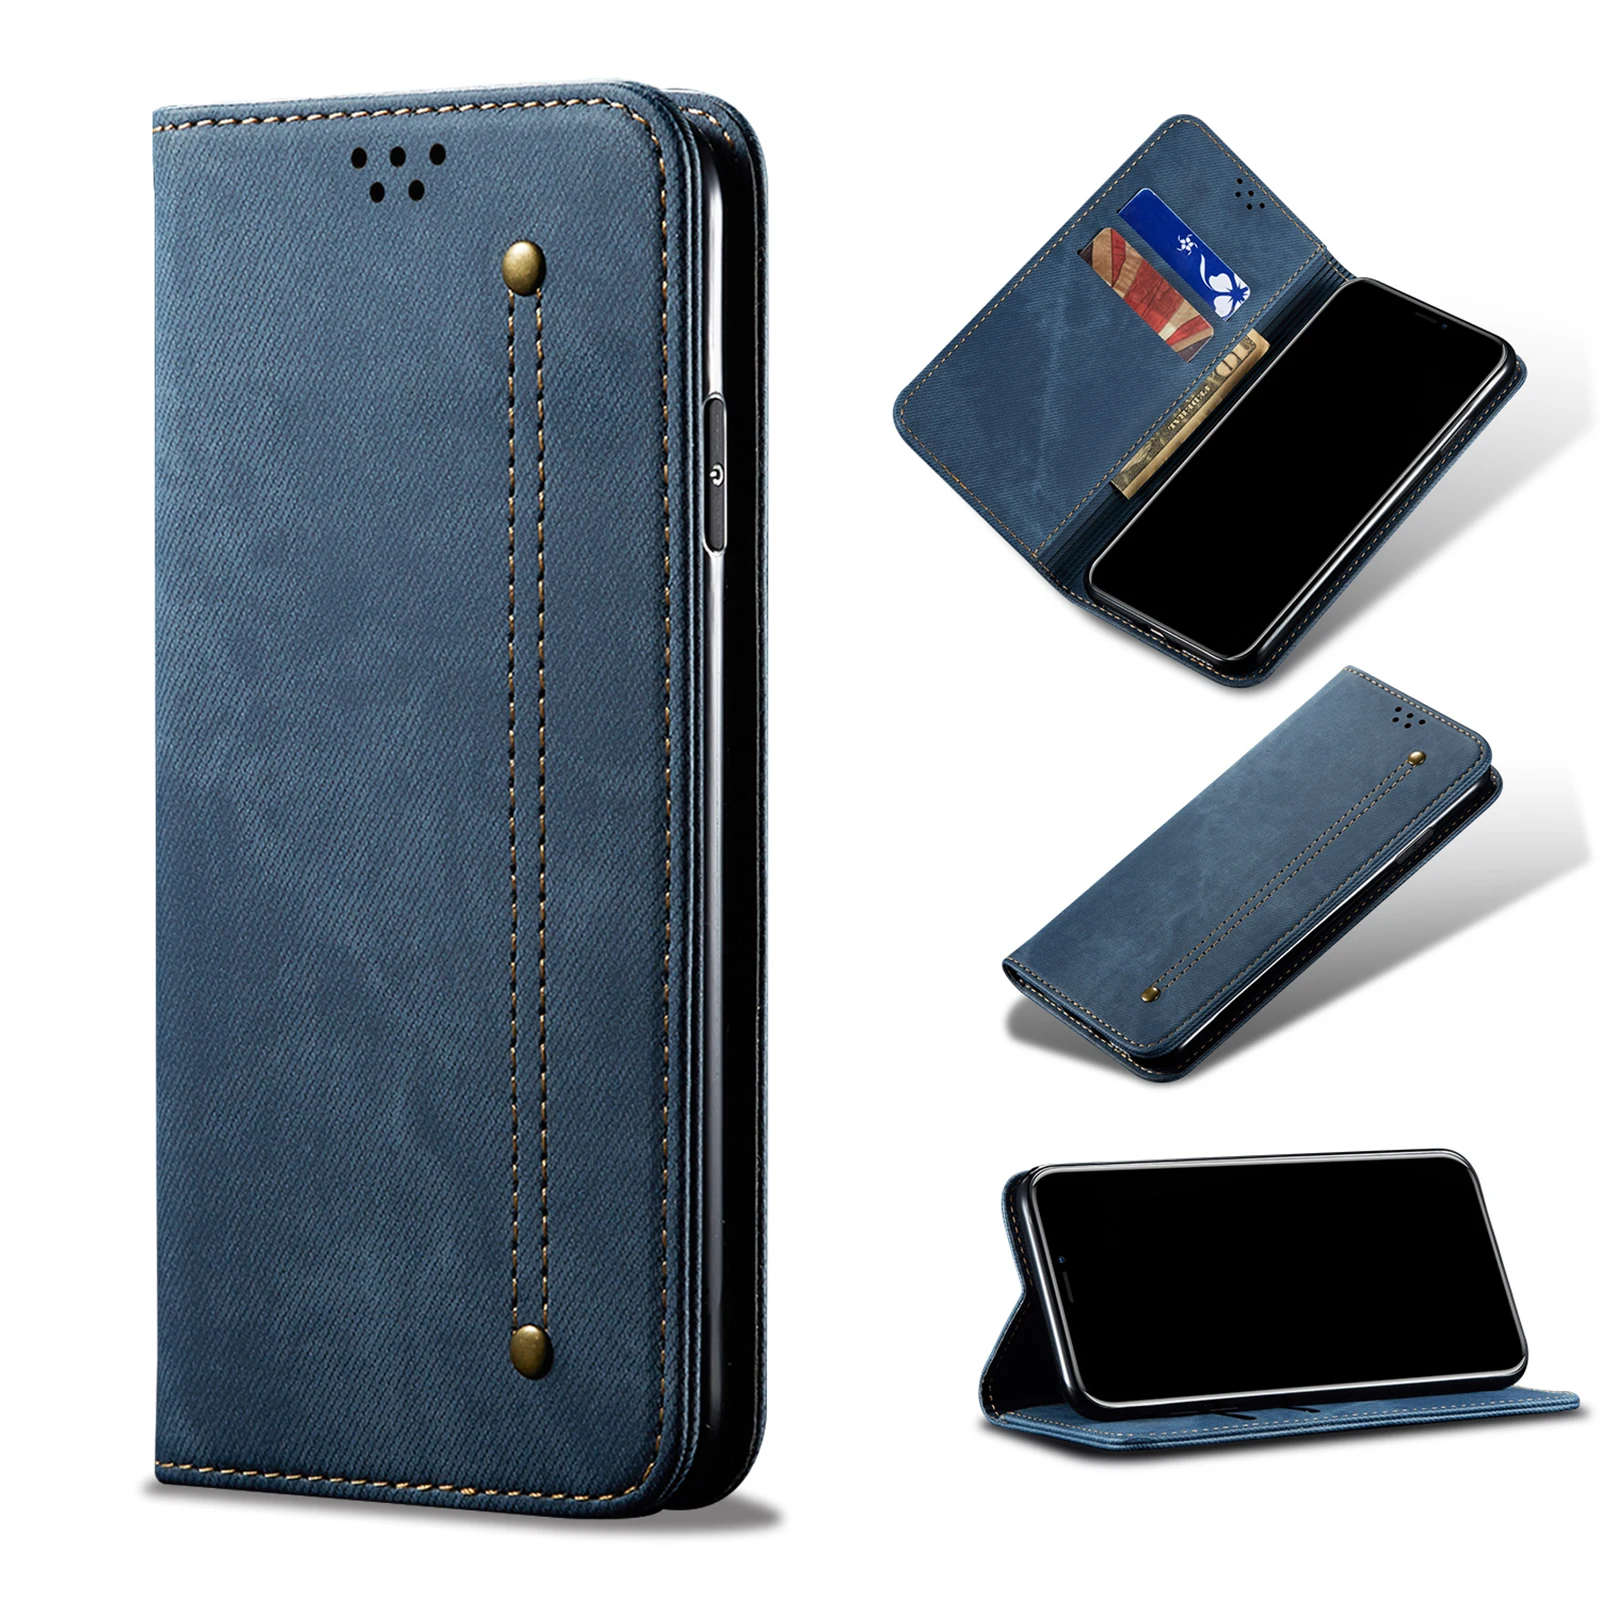 

For Xiaomi POCO M3 Customized Portable Cellphone Cases Jeans Leather Holder Bracket Pocket Smartphone Case